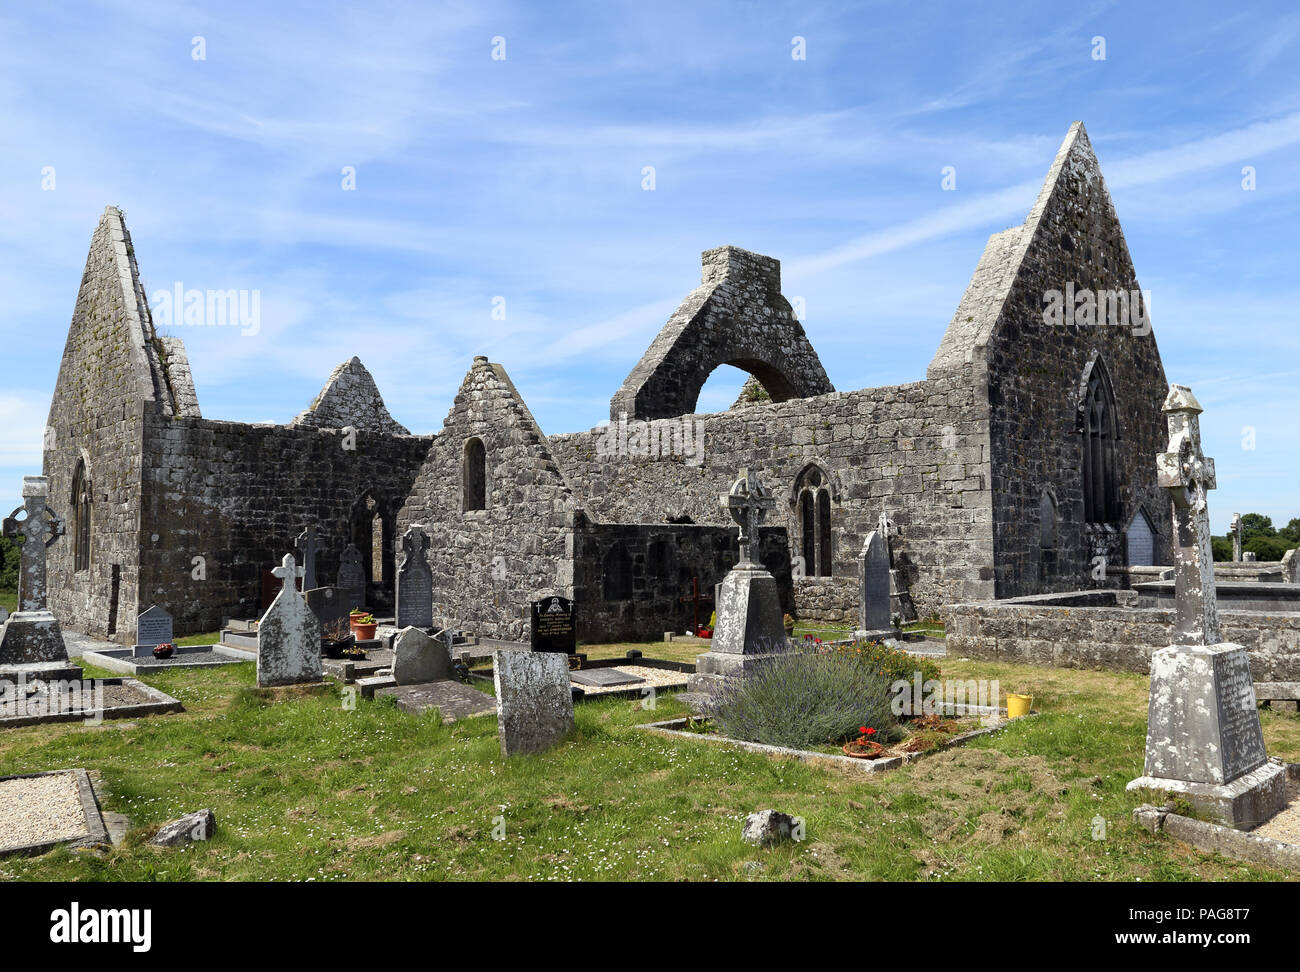 Killmacduagh Monastery is a ruined 7th century abbey near the town of Gort in County Galway, Ireland. It was the birthplace of the Diocese of Kilmacdu Stock Photo